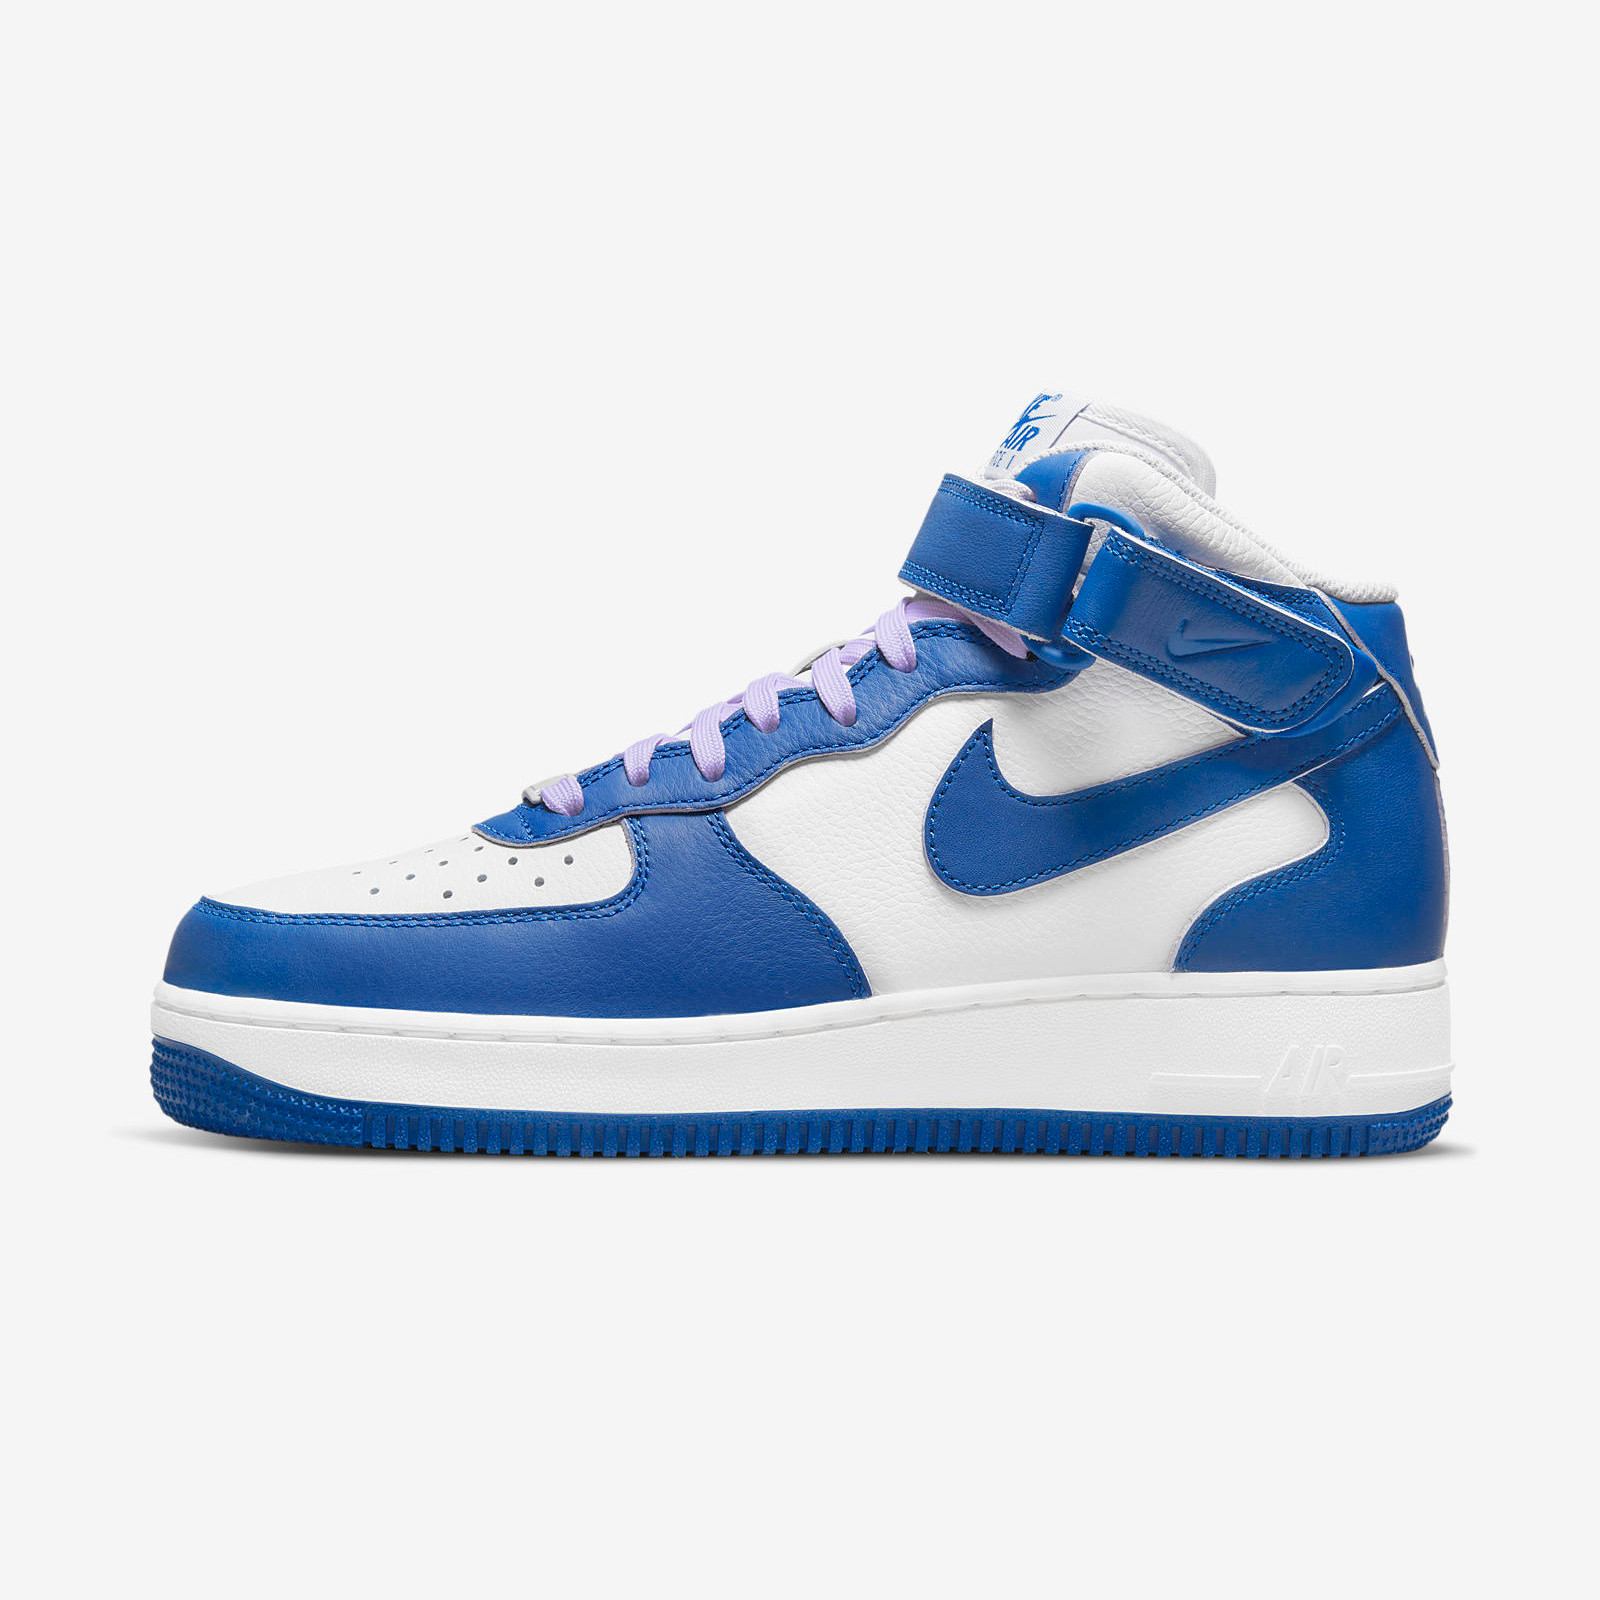 Nike Air Force 1 Mid
« Military Blue »